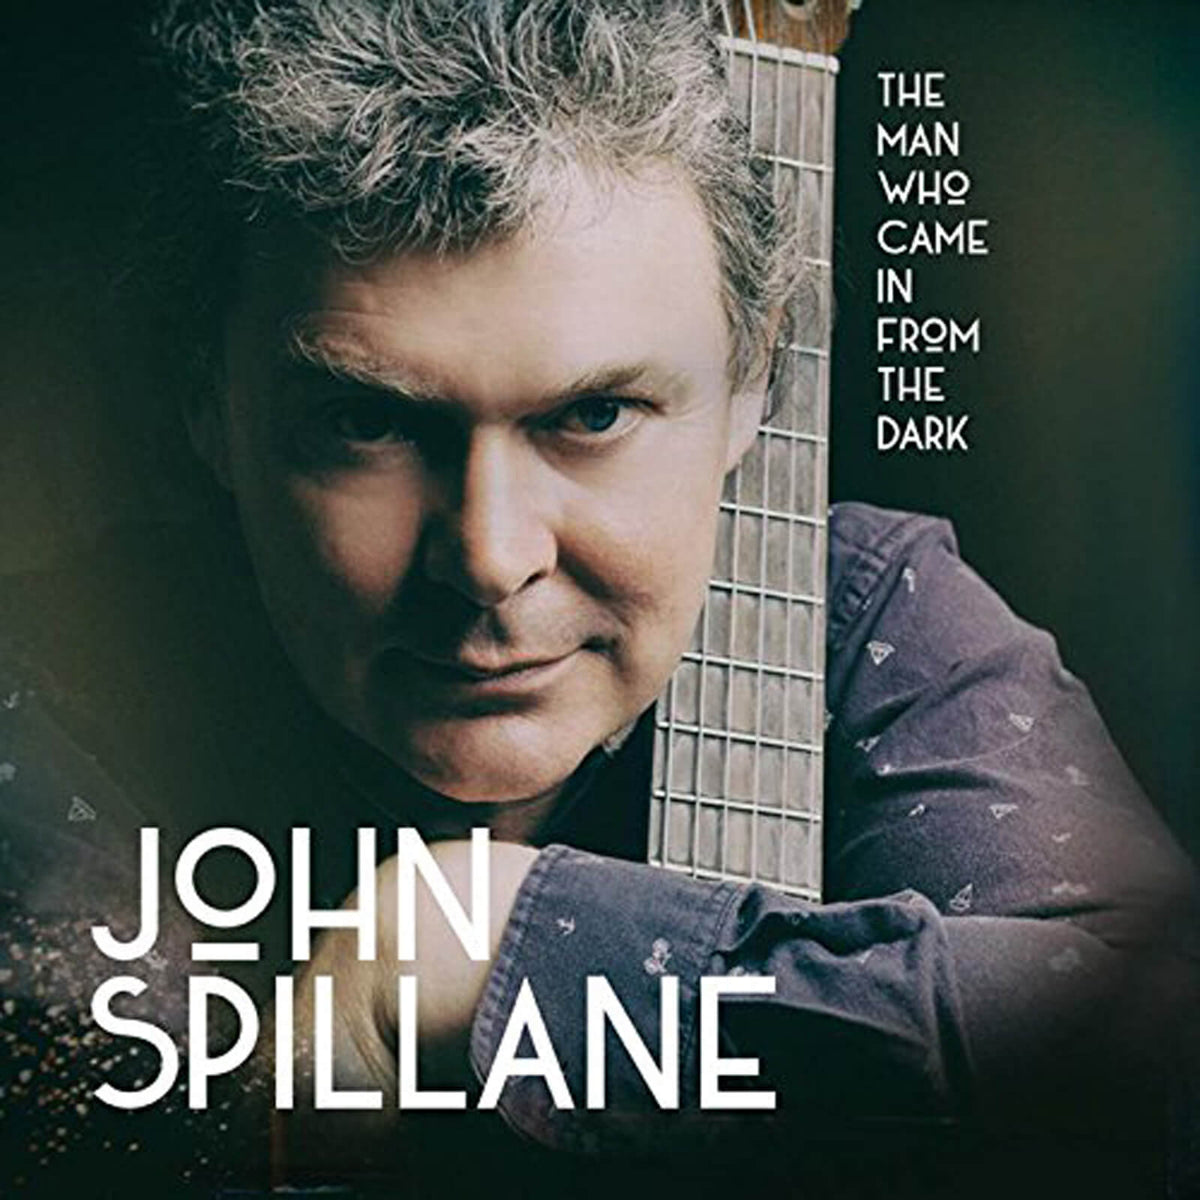 John Spillane : The Man Who Came in from the Dark